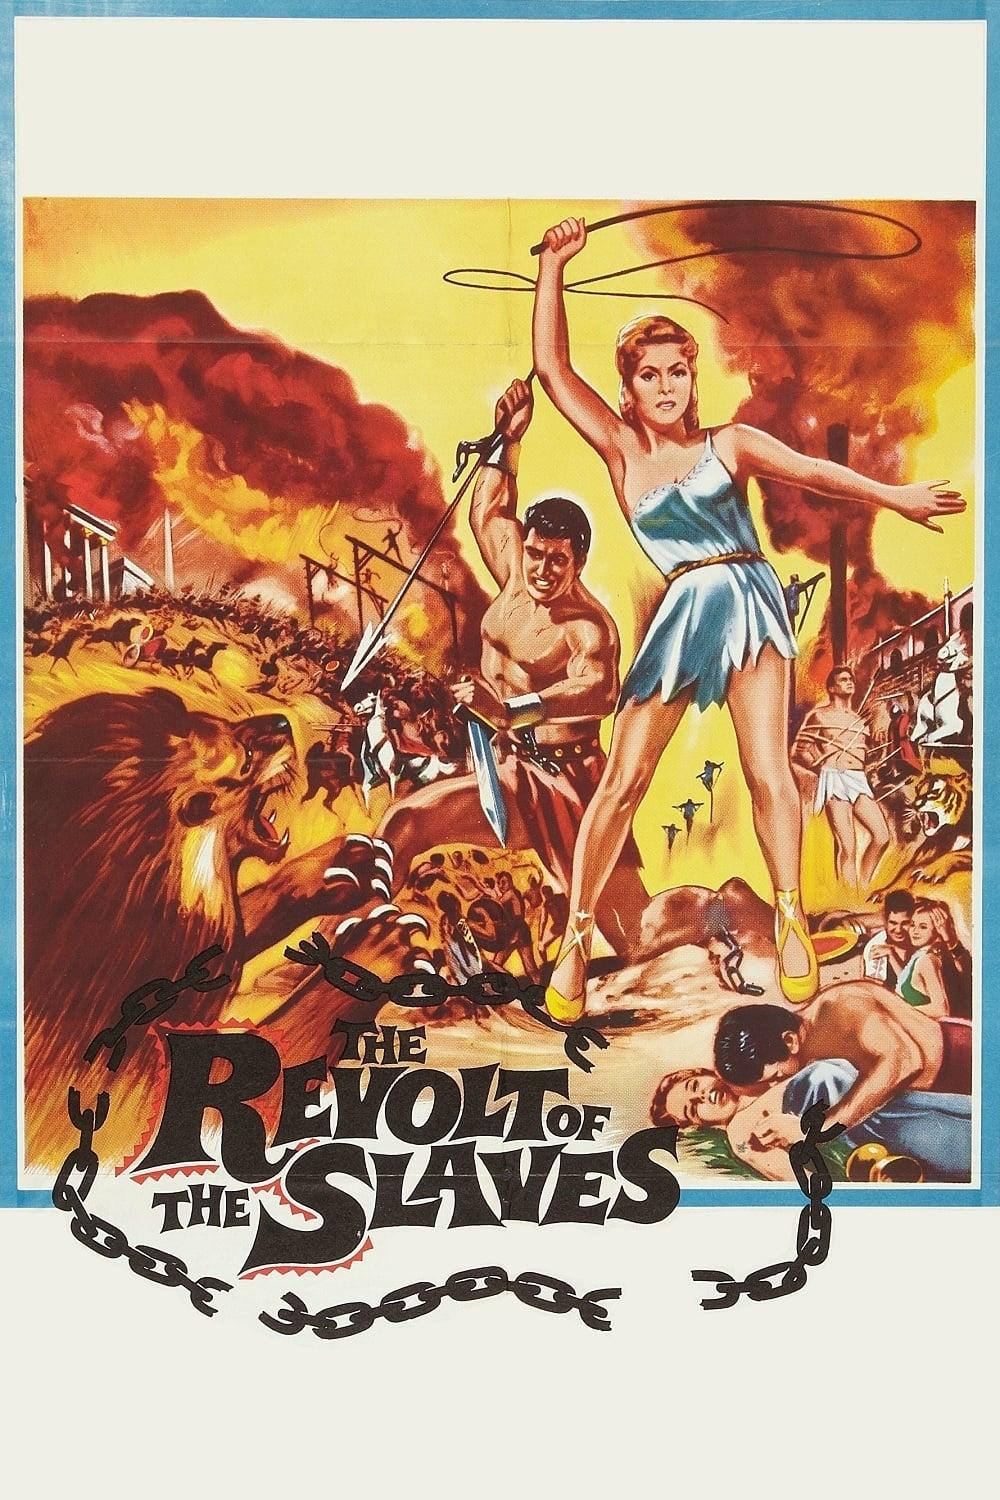 The Revolt of the Slaves poster